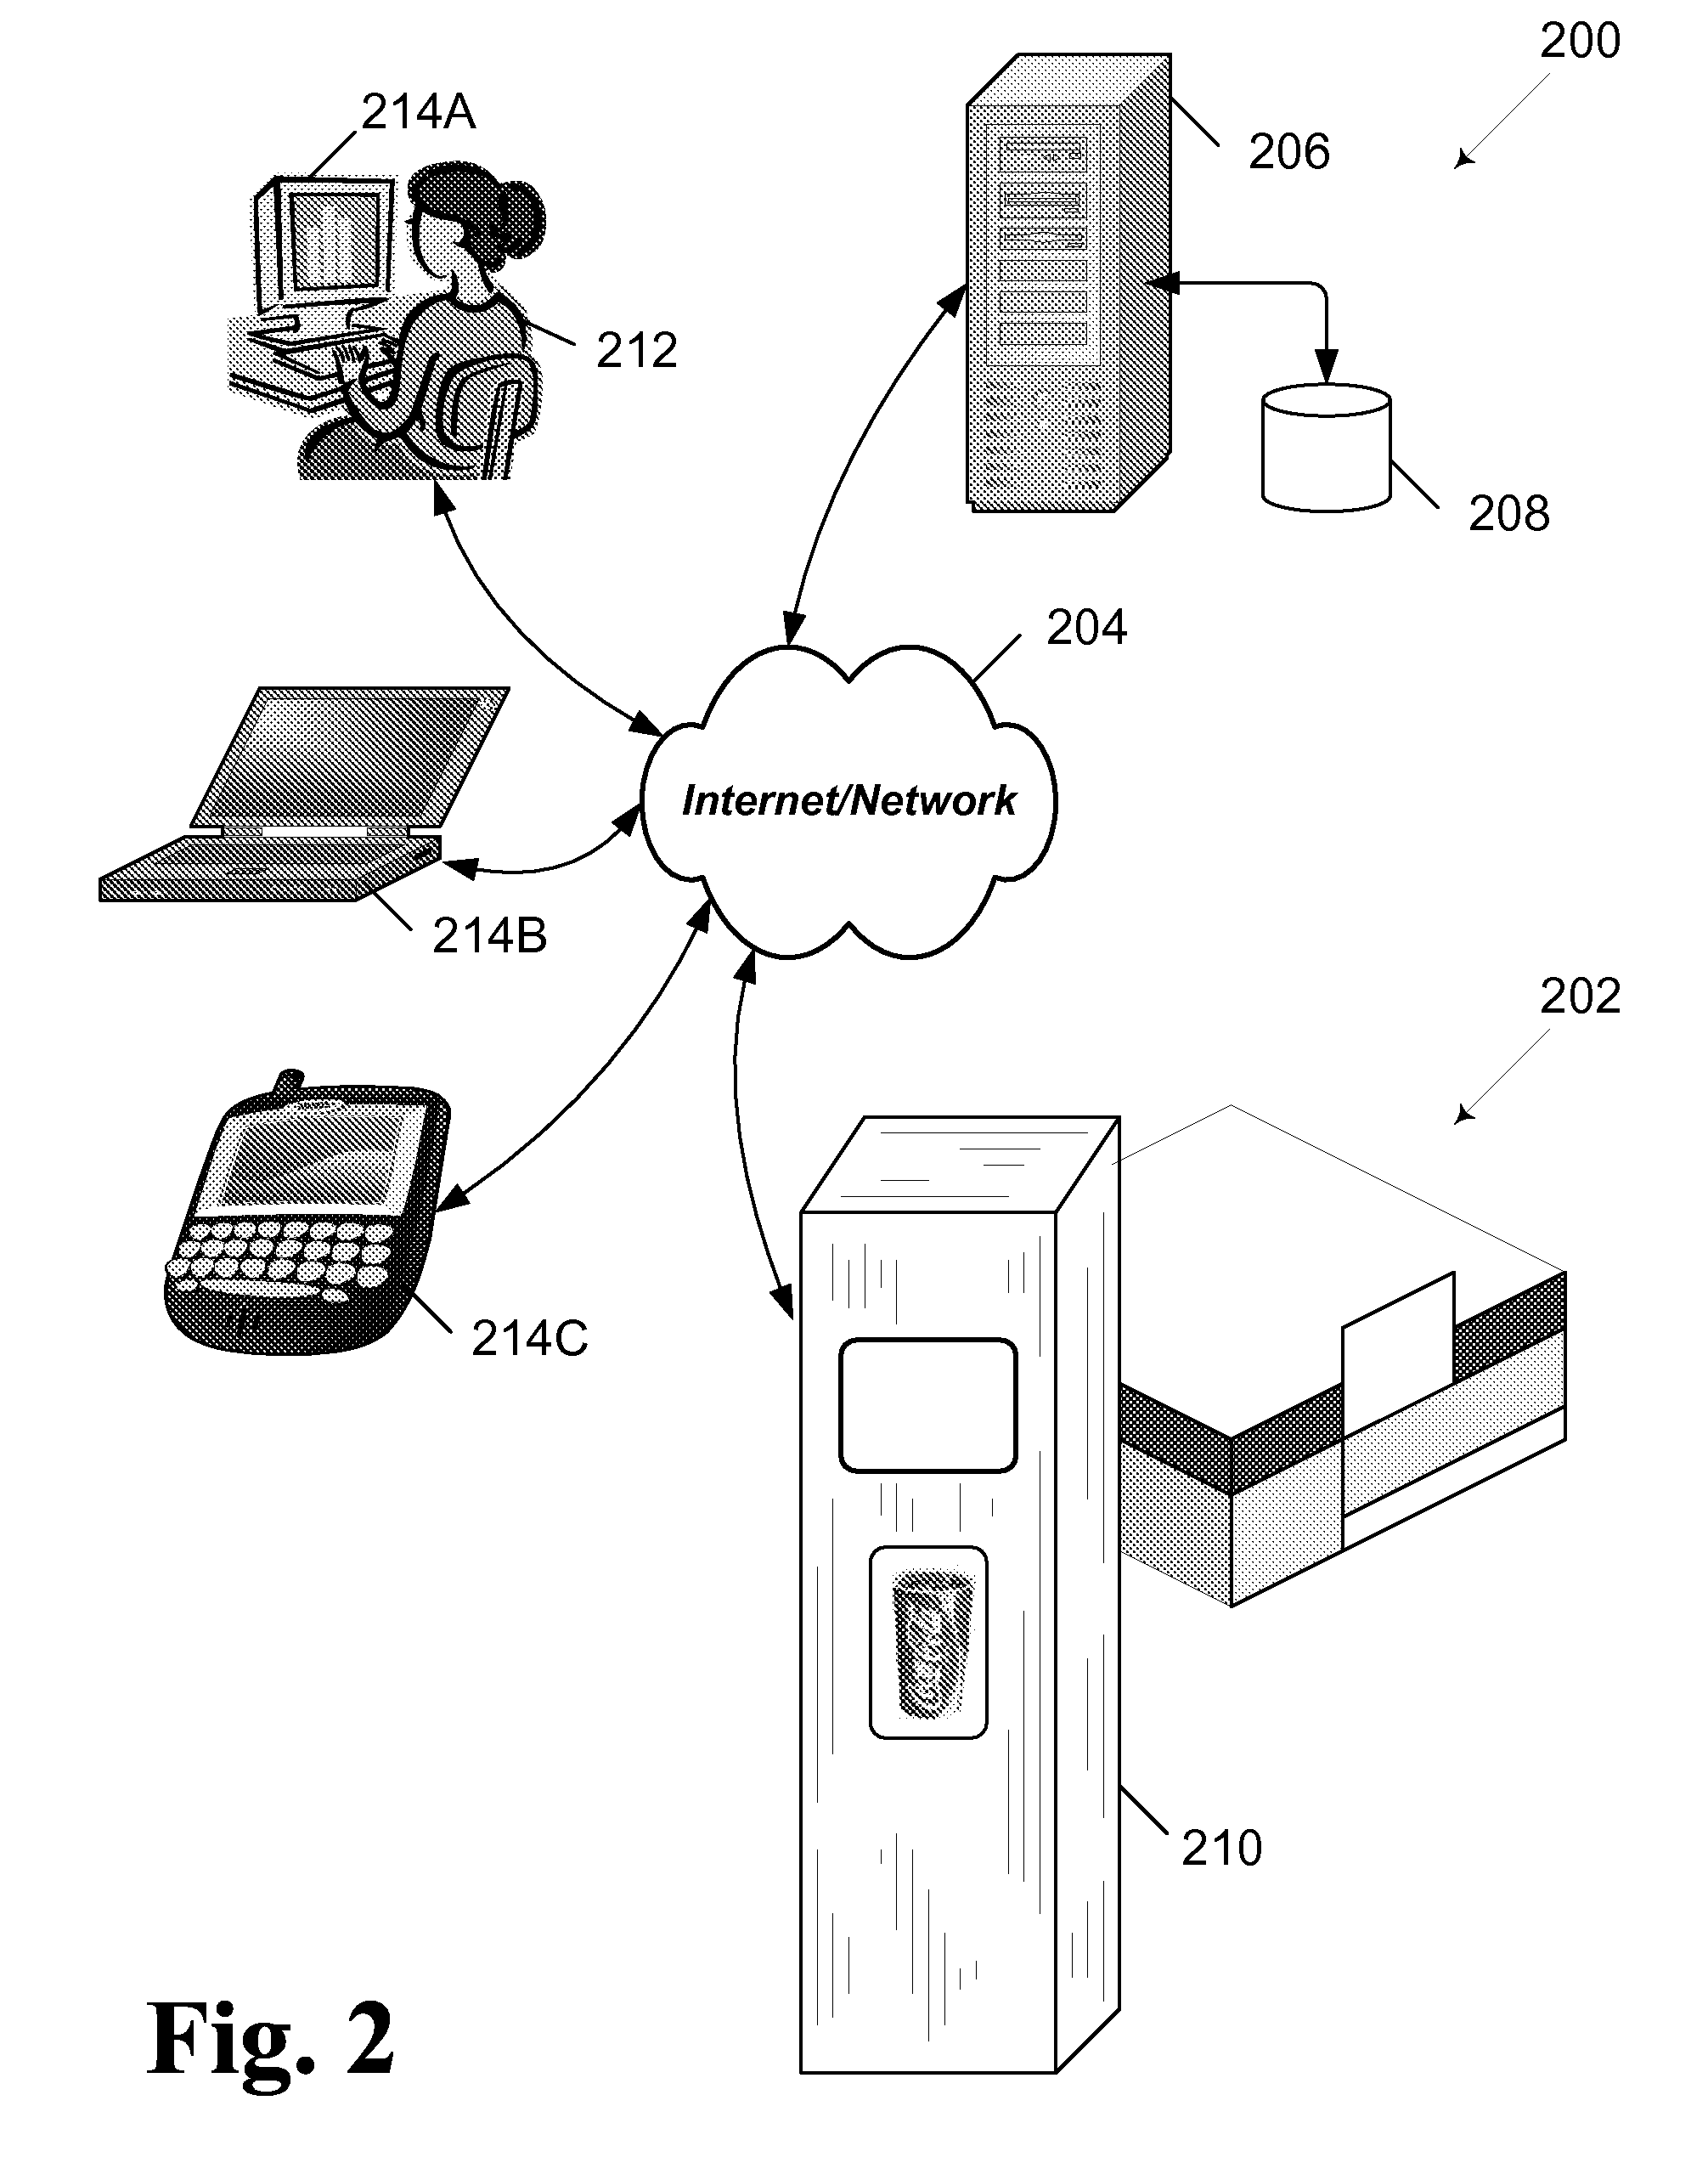 Systems and Methods for Facilitating Consumer-Dispenser Interactions